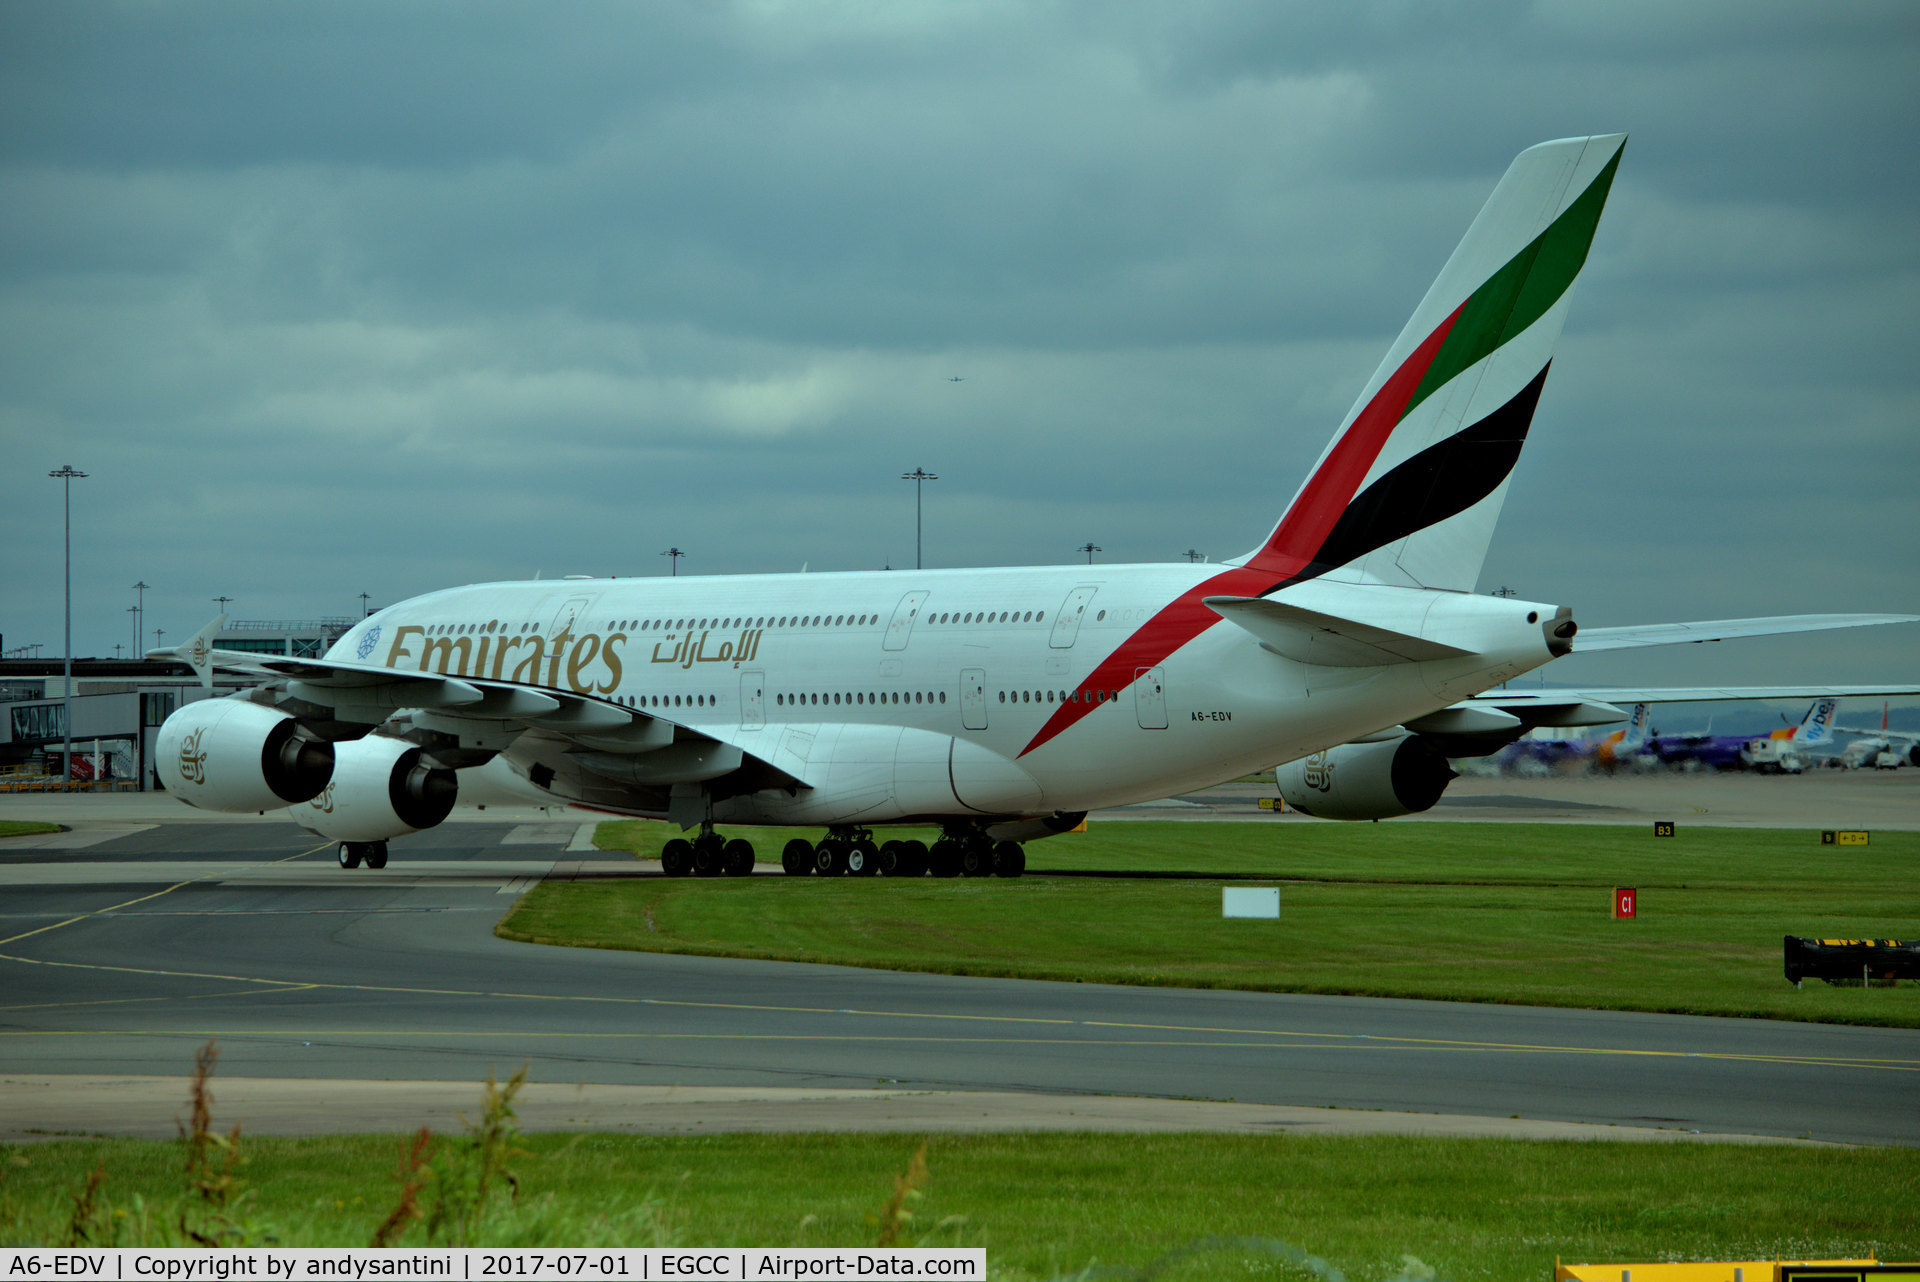 A6-EDV, 2011 Airbus A380-861 C/N 101, taxing in to its gate/stand egcc uk